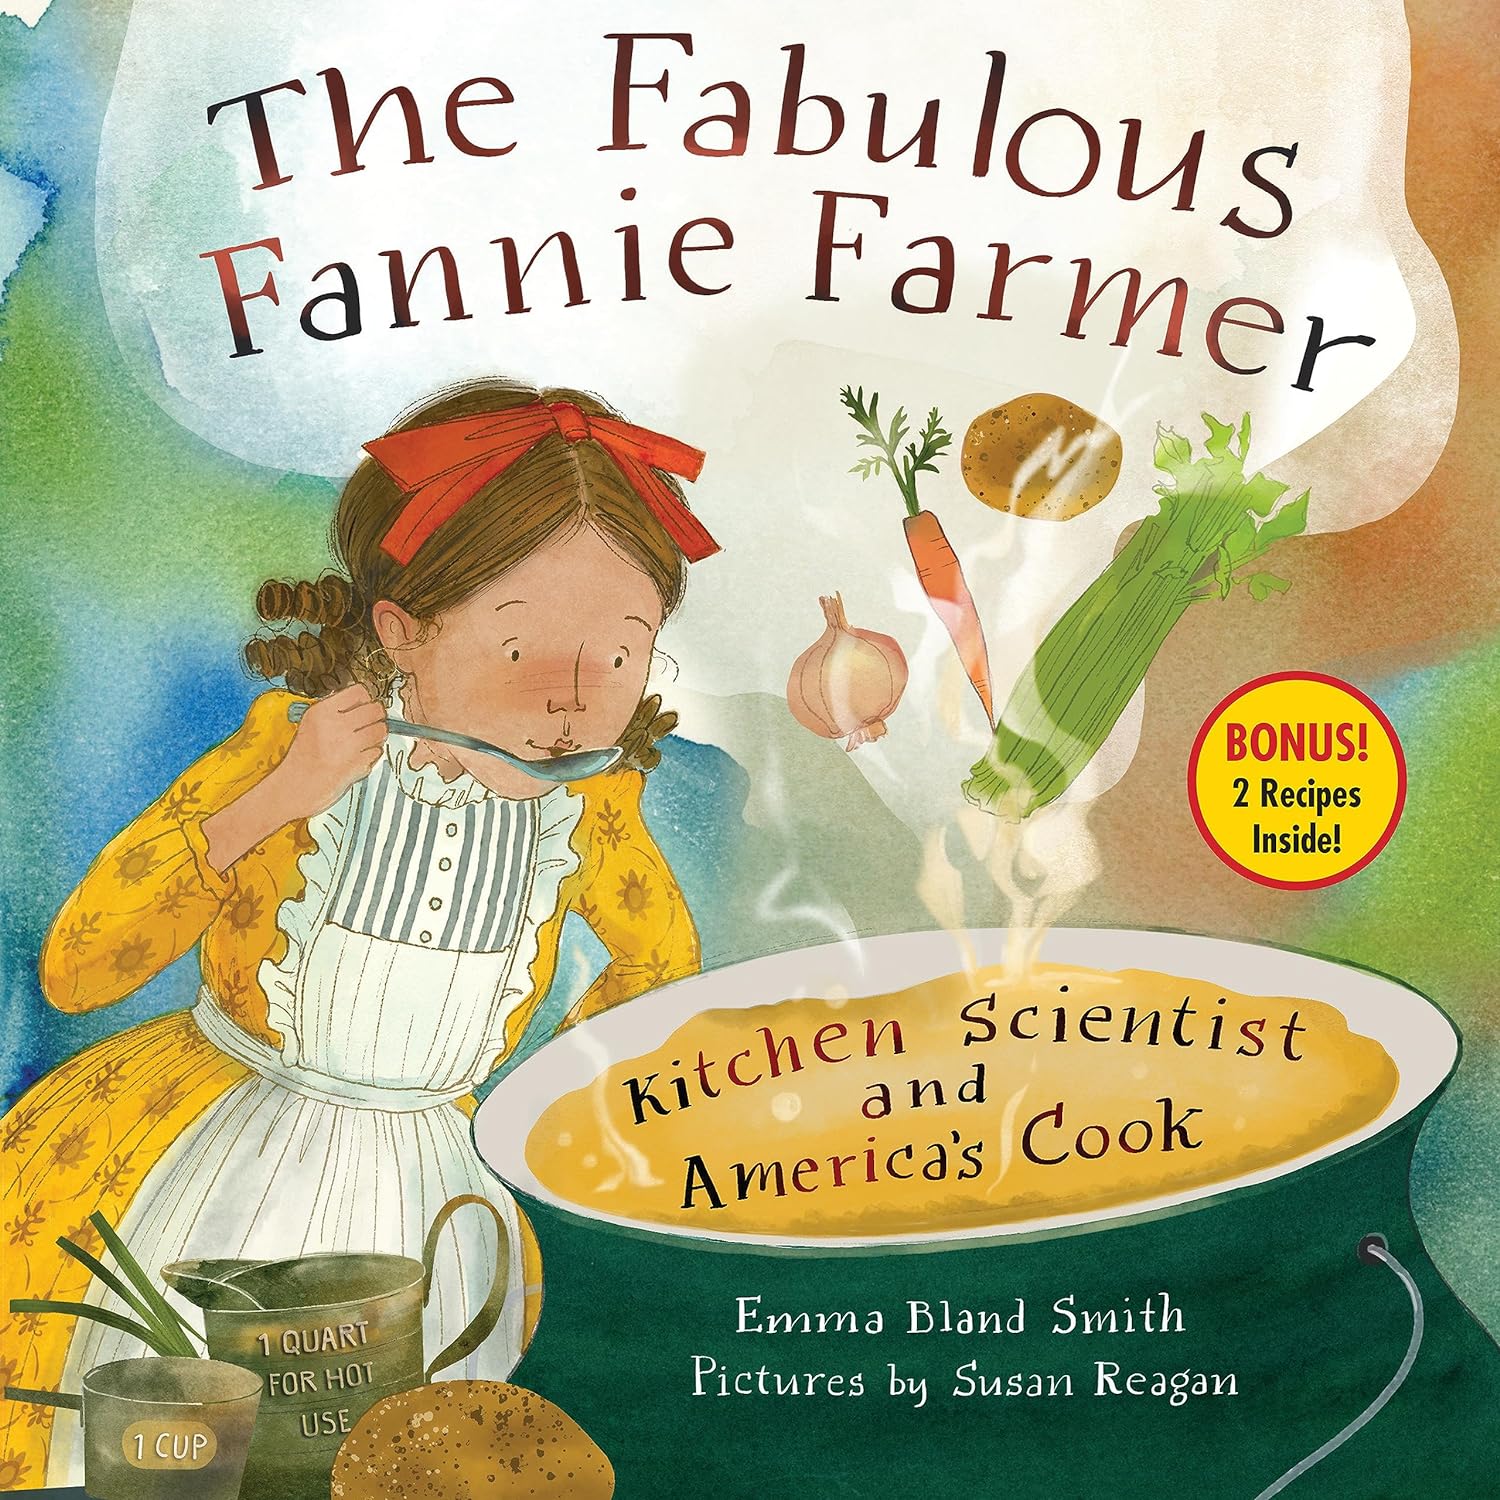 The Fabulous Fannie Farmer: Kitchen Scientist and America’s Cook (Emma Bland Smith, Susan Reagan)